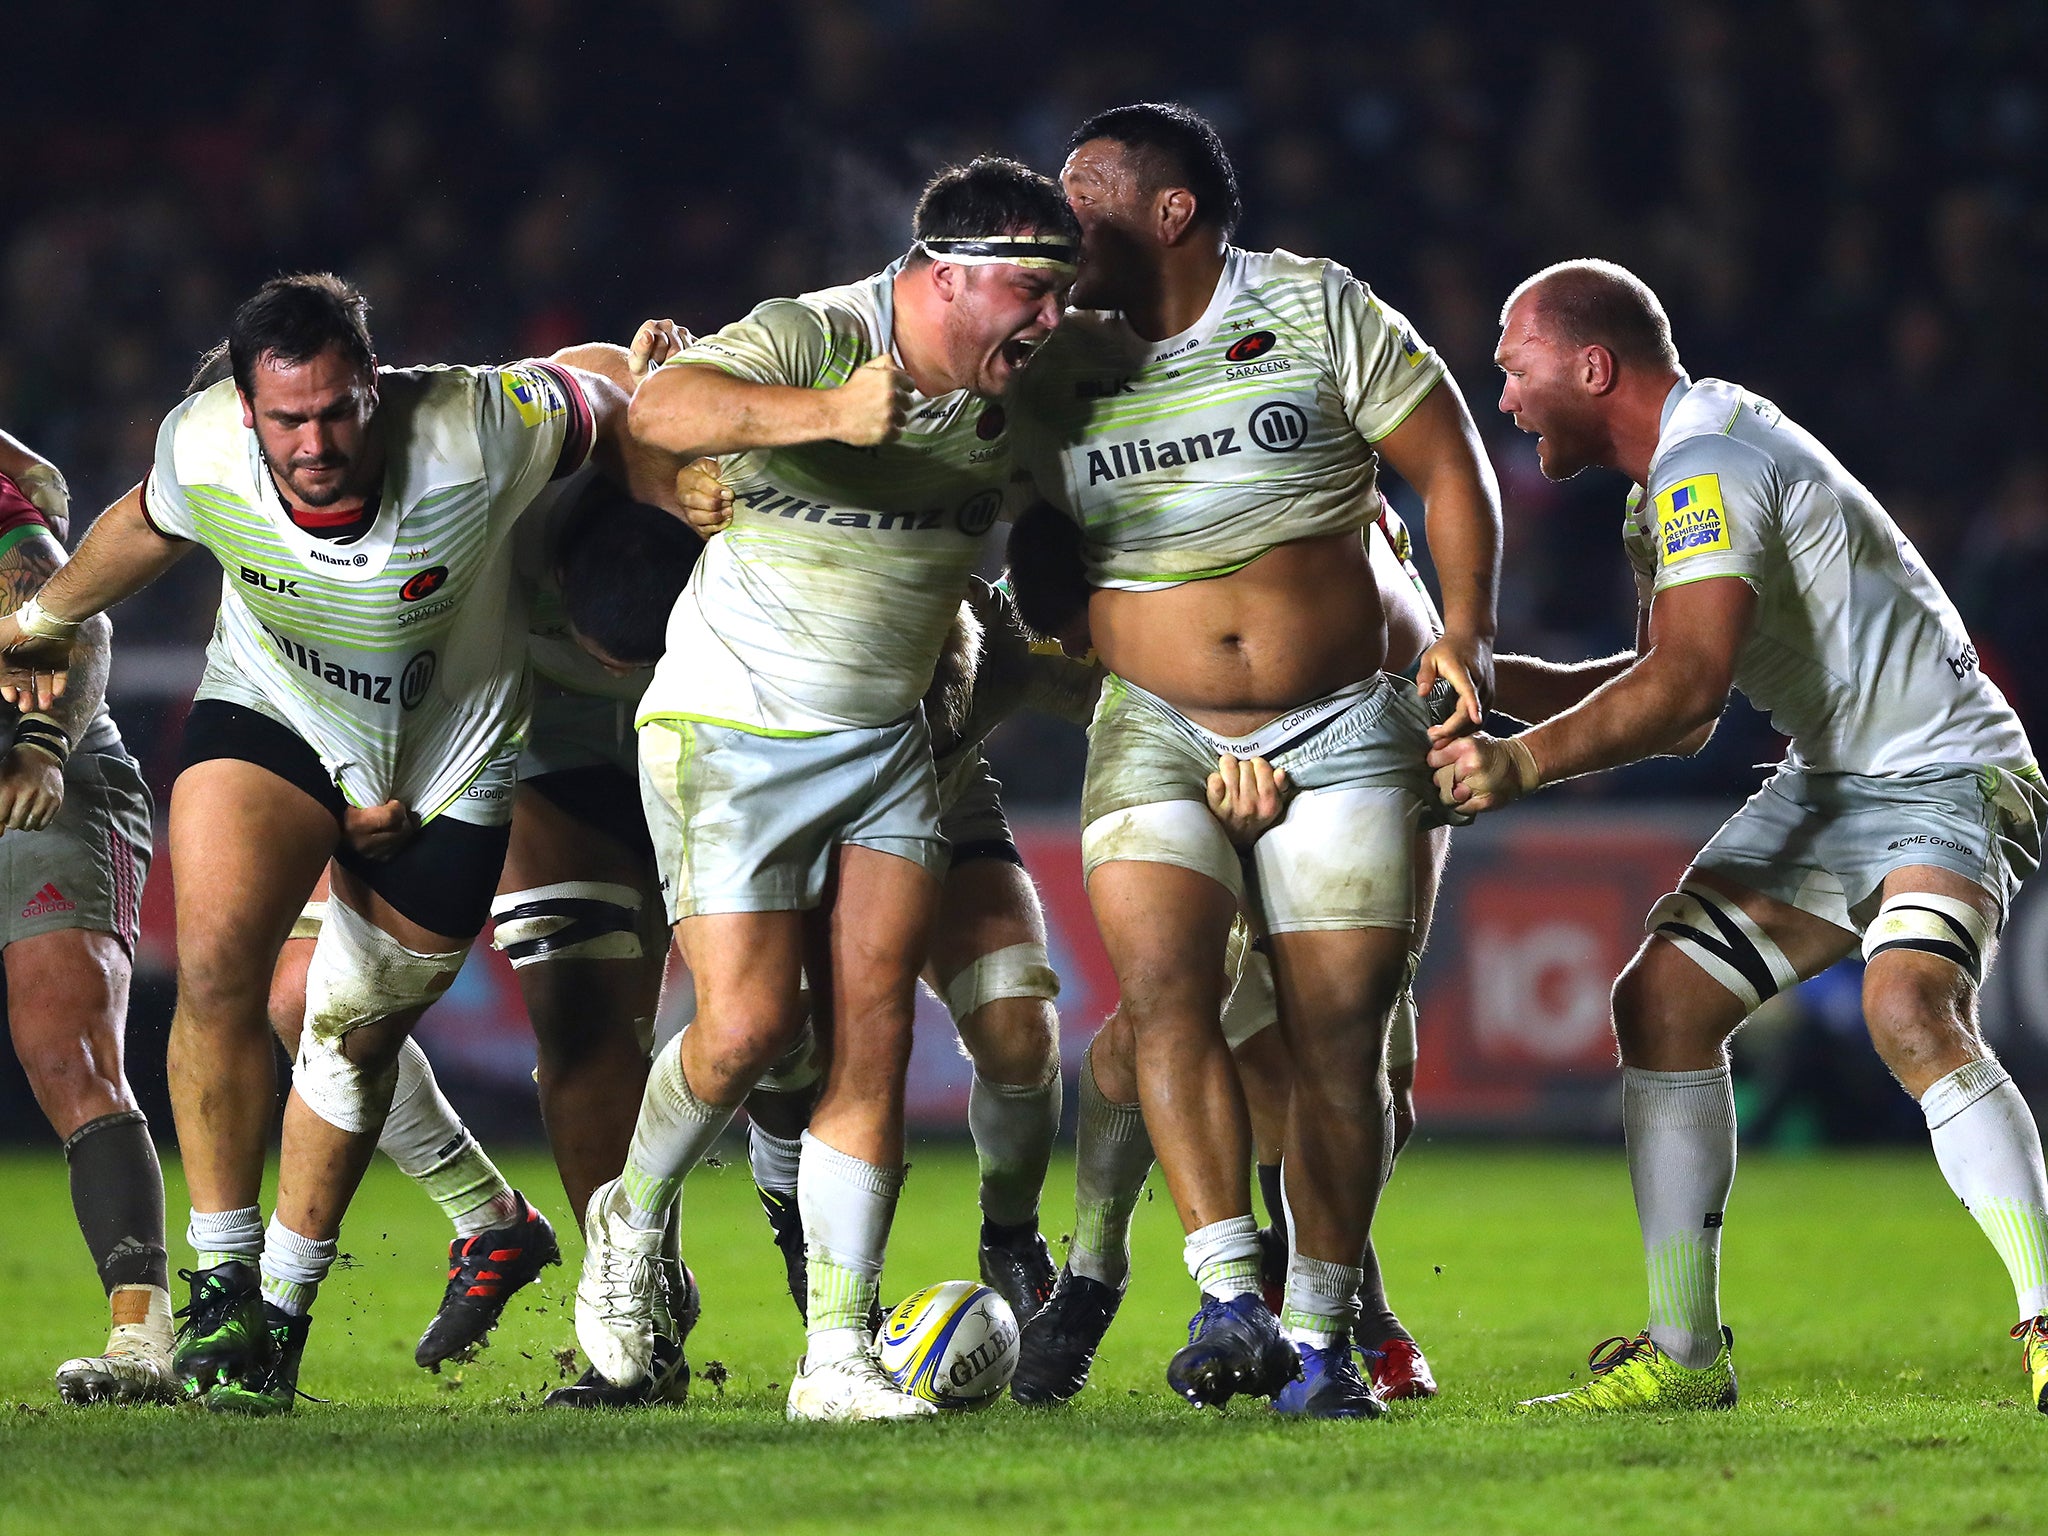 Saracens face a season-defining week of fixtures against Clermont Auvergne